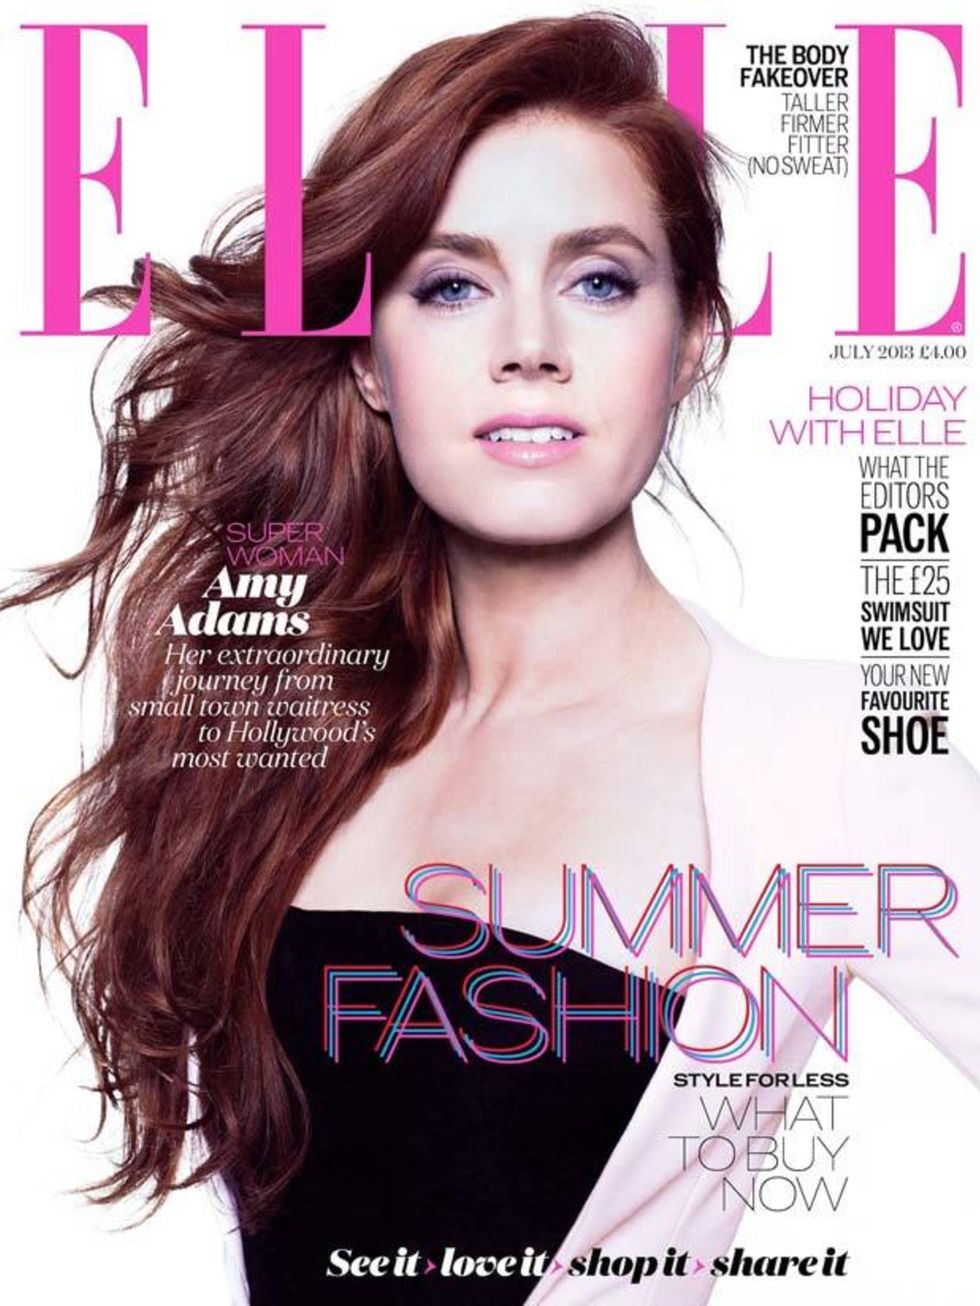 <p>Elegant, refreshing, natural: Amy Adams, July 2013.</p>

<p>Florrie says:</p>

<p>'Add a healthy glow with a peachy pink blush on the apples of your cheeks to avoid looking washed out.'</p>

<p><a href="http://www.clinique.co.uk/product/1593/29770/Make